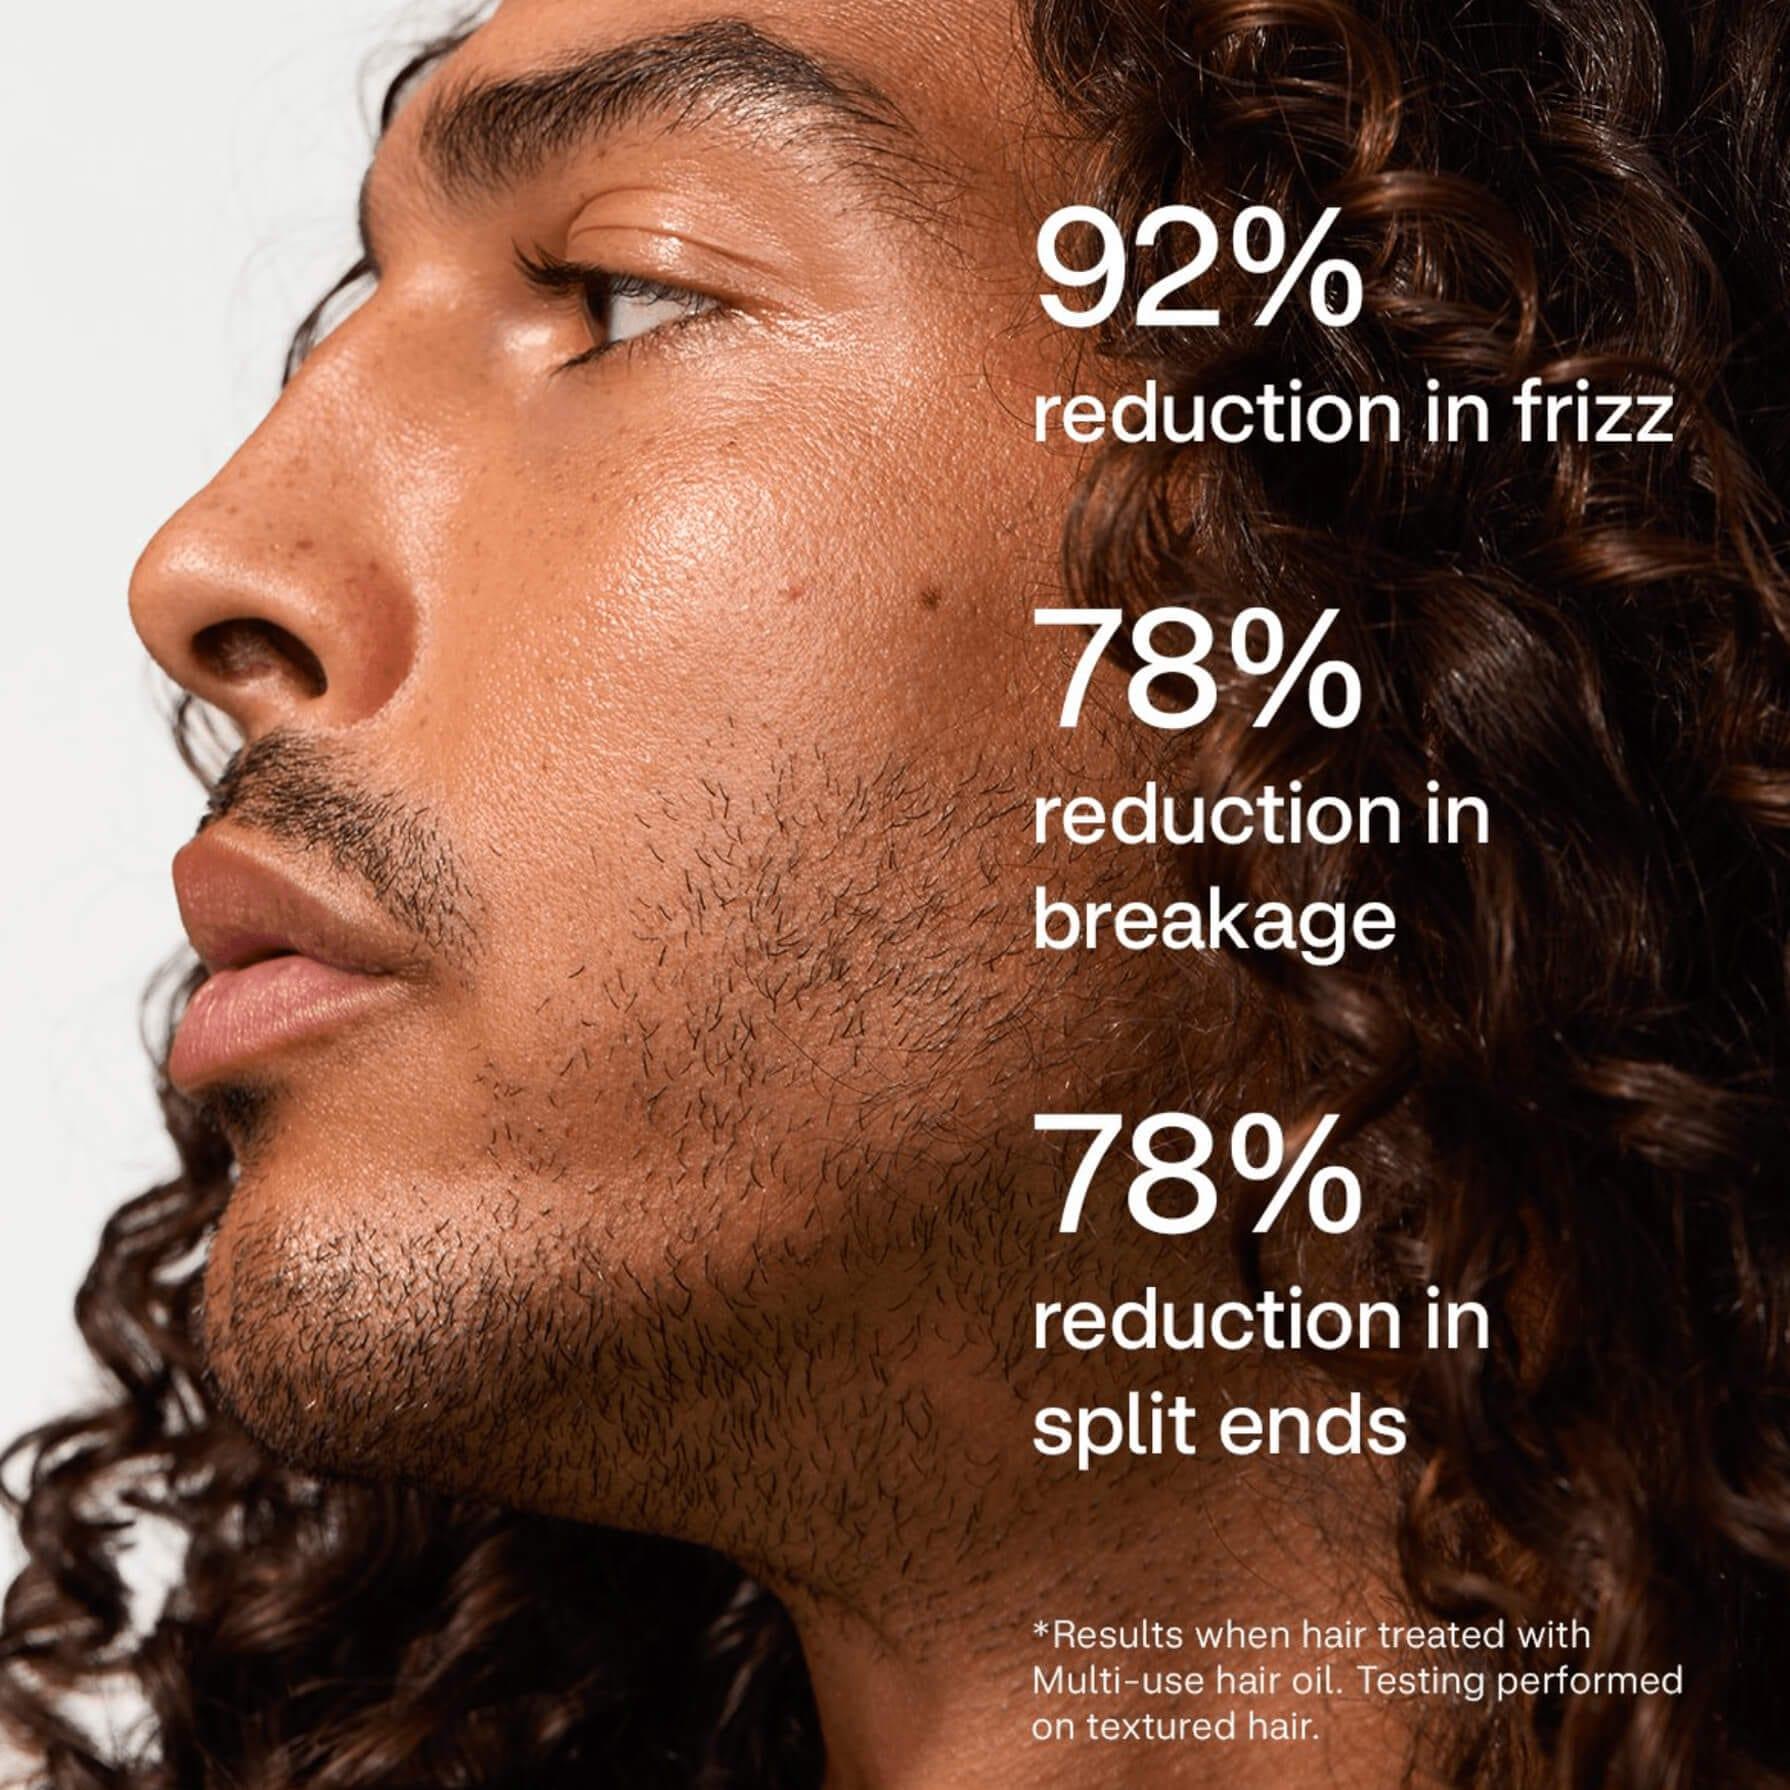 925 reduction in frizz, 78% reduction in breakage and 78% reduction in split ends.